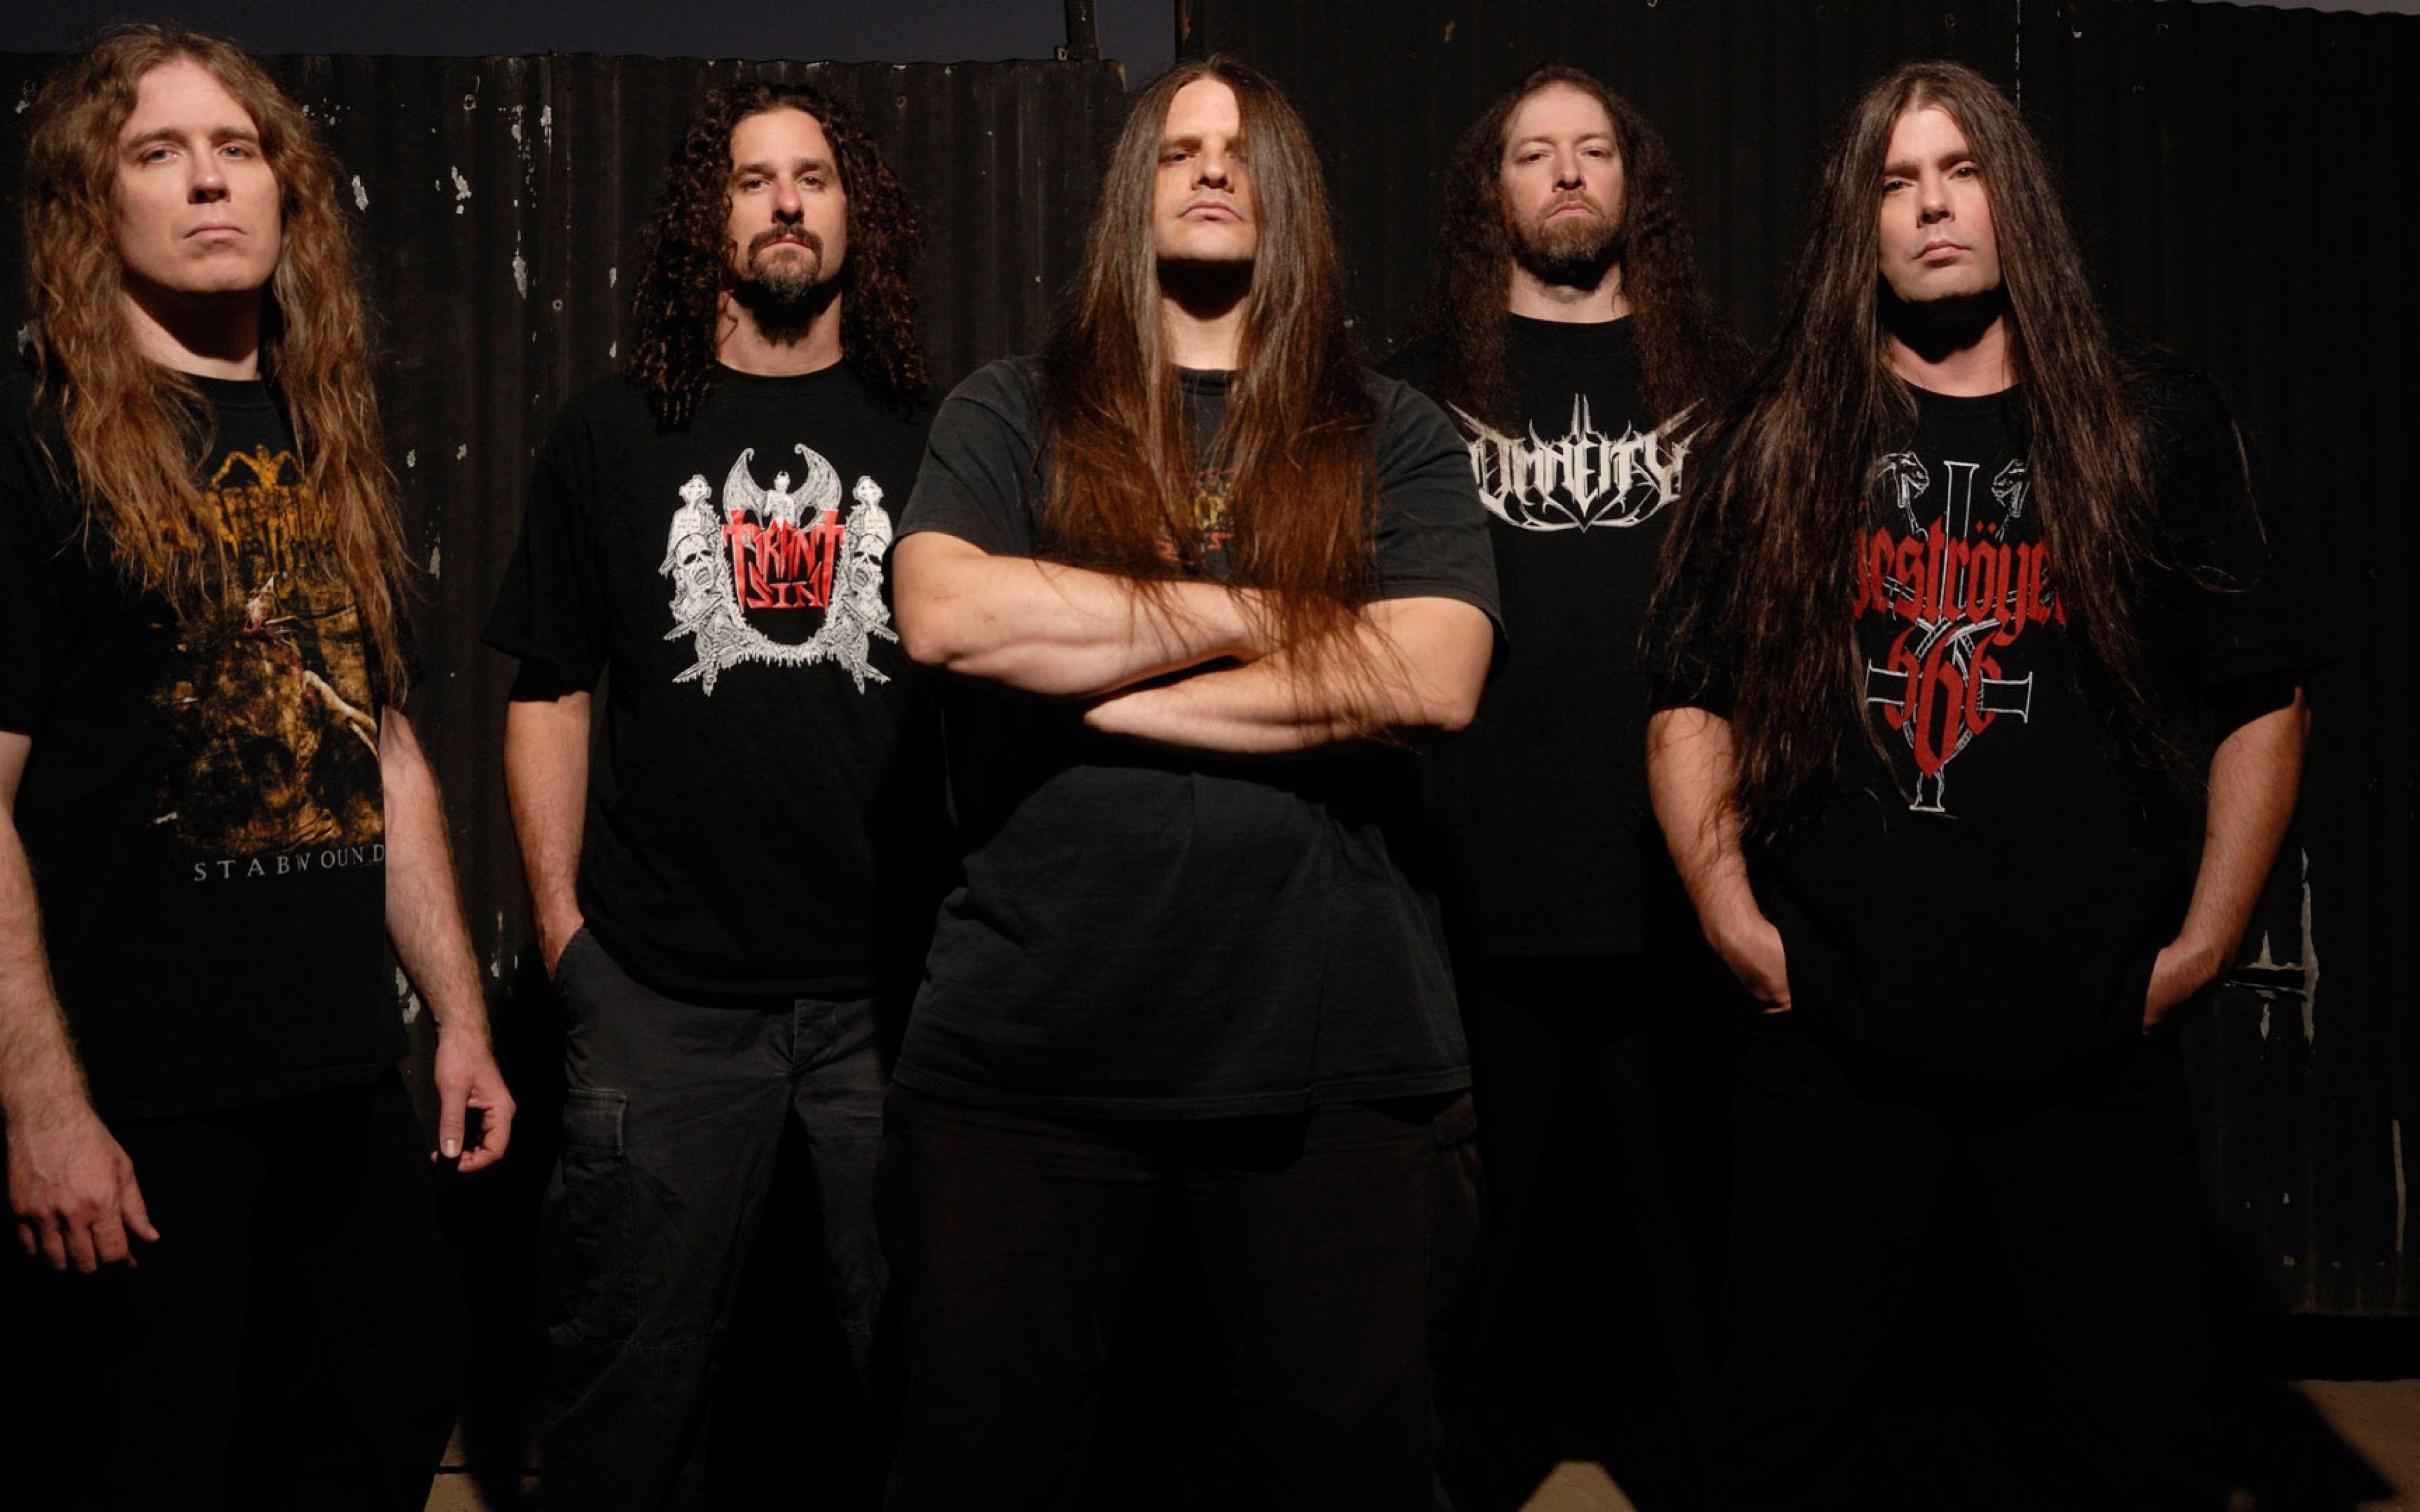 Download Wallpaper 3840x2400 Cannibal corpse, Hair, Print, T